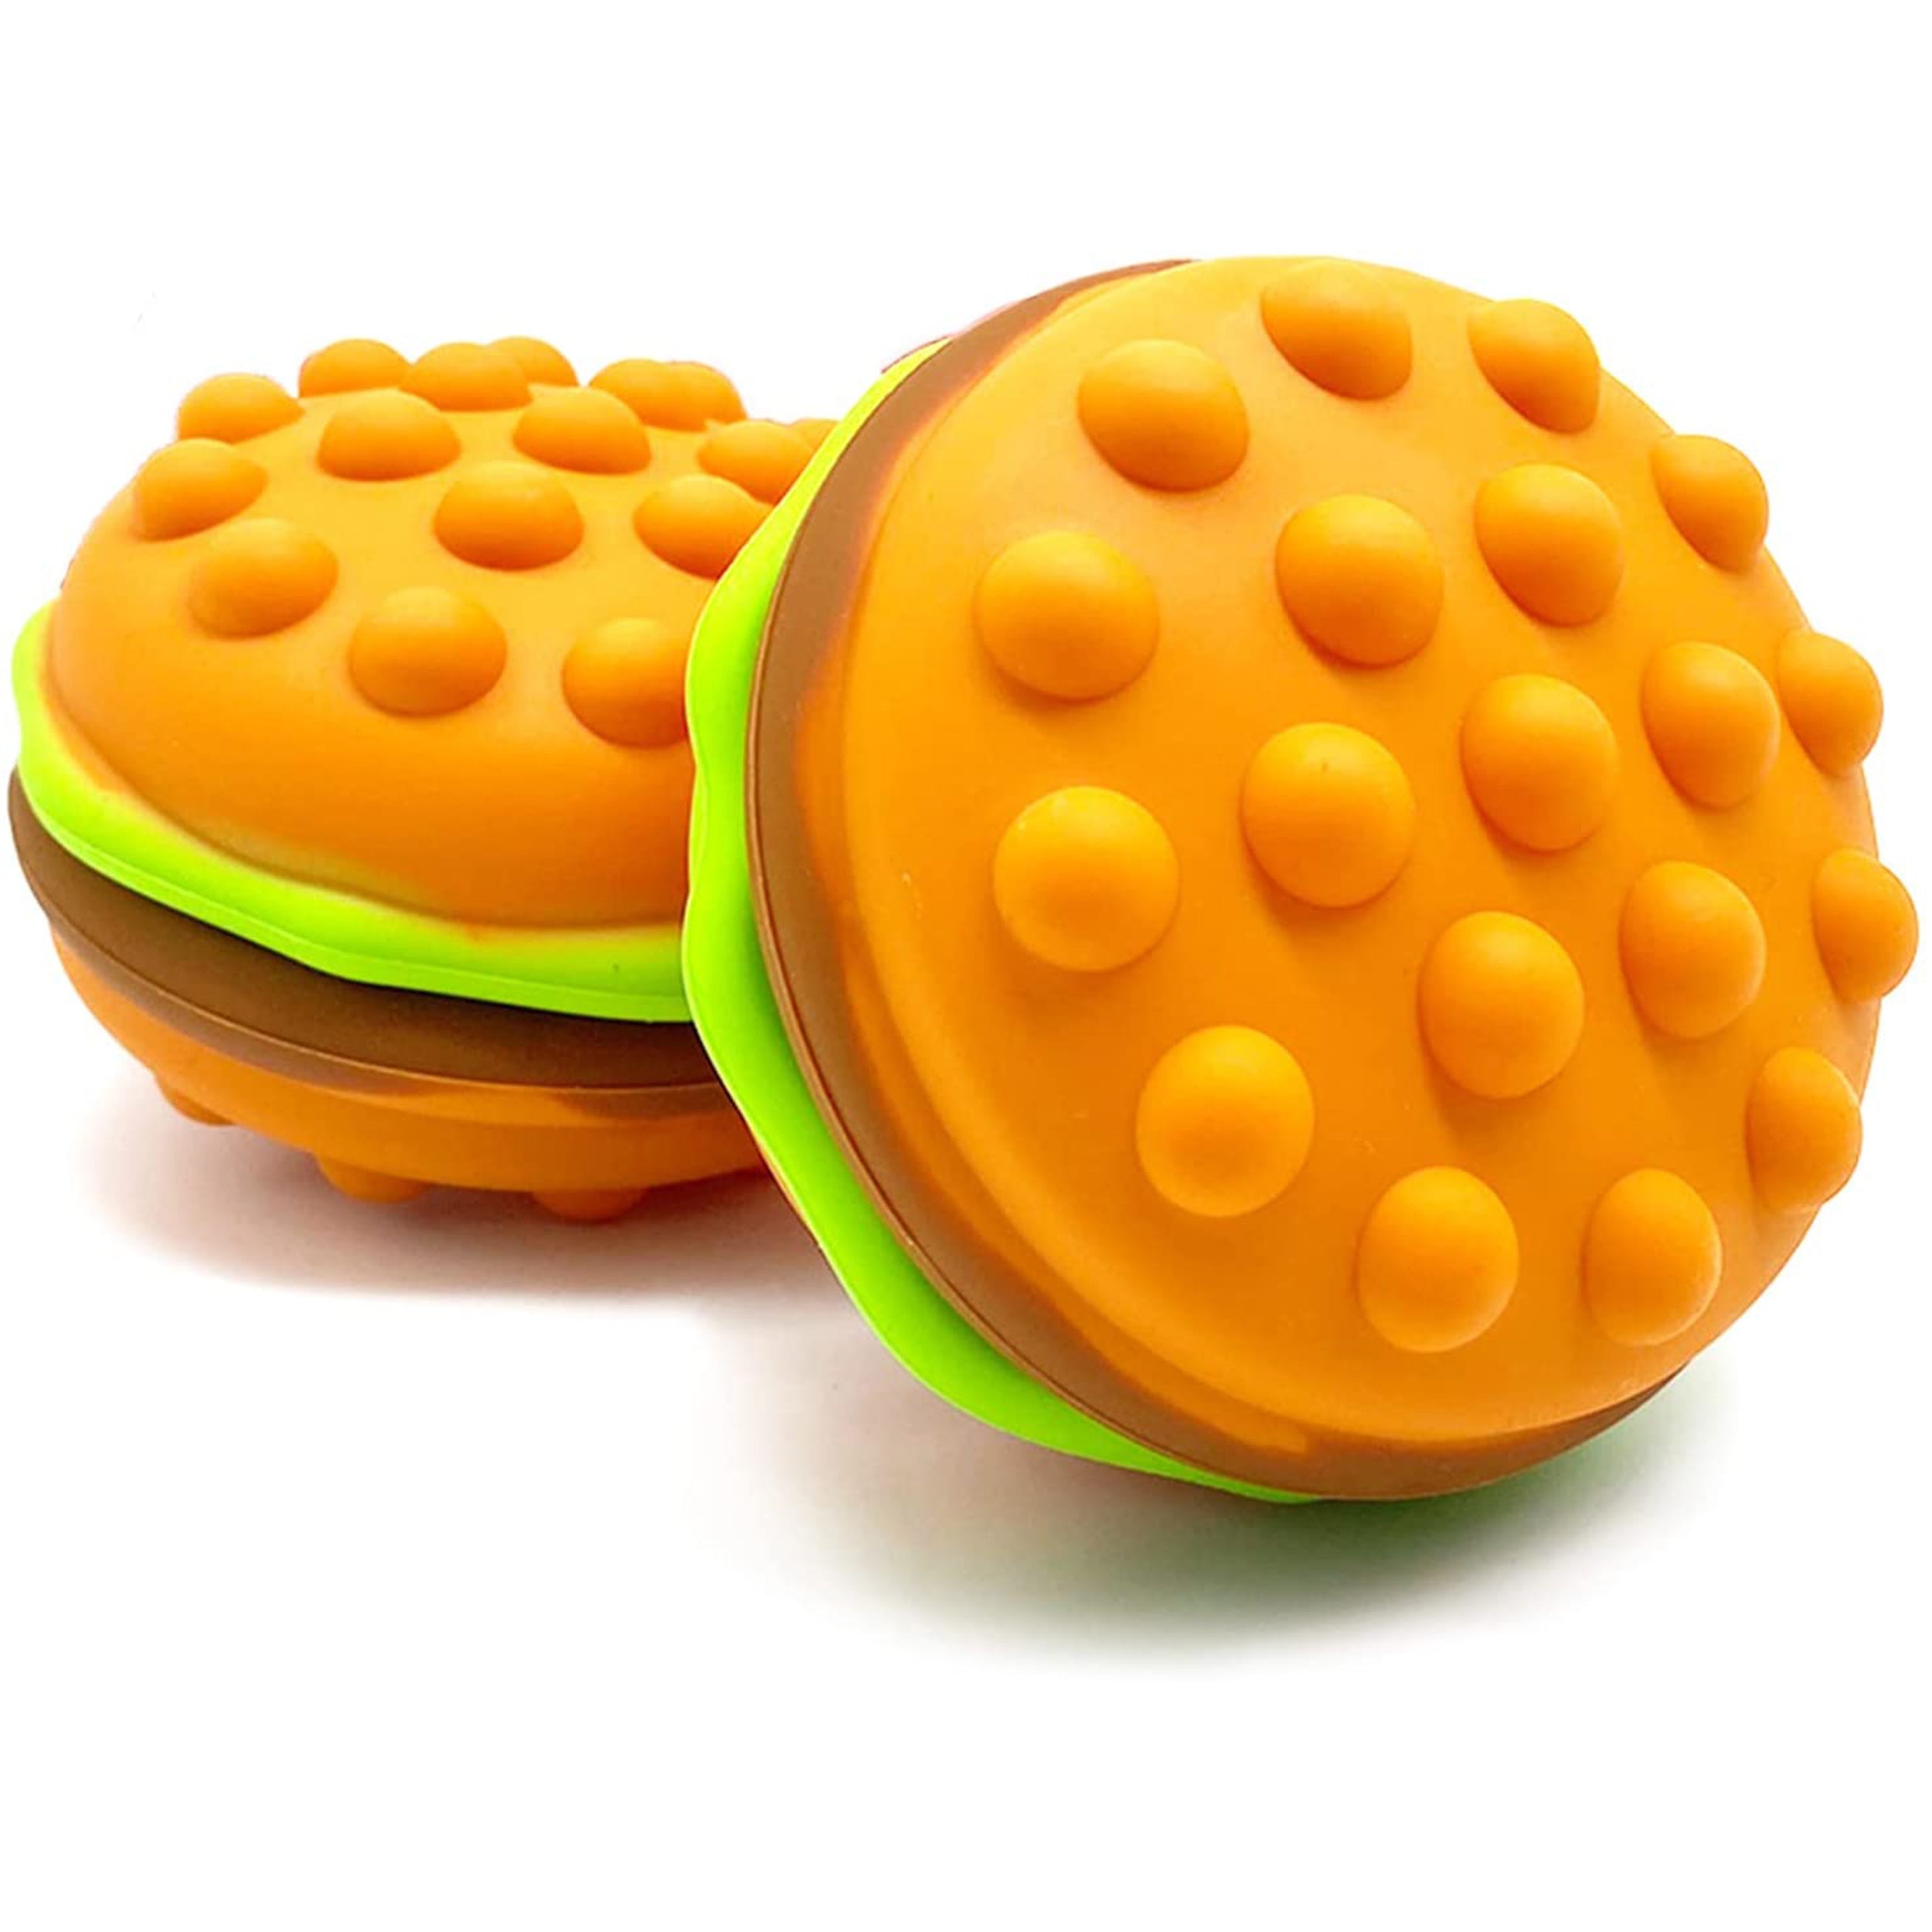 Stress Relieving Hamburger Pop It Toy - Pieces